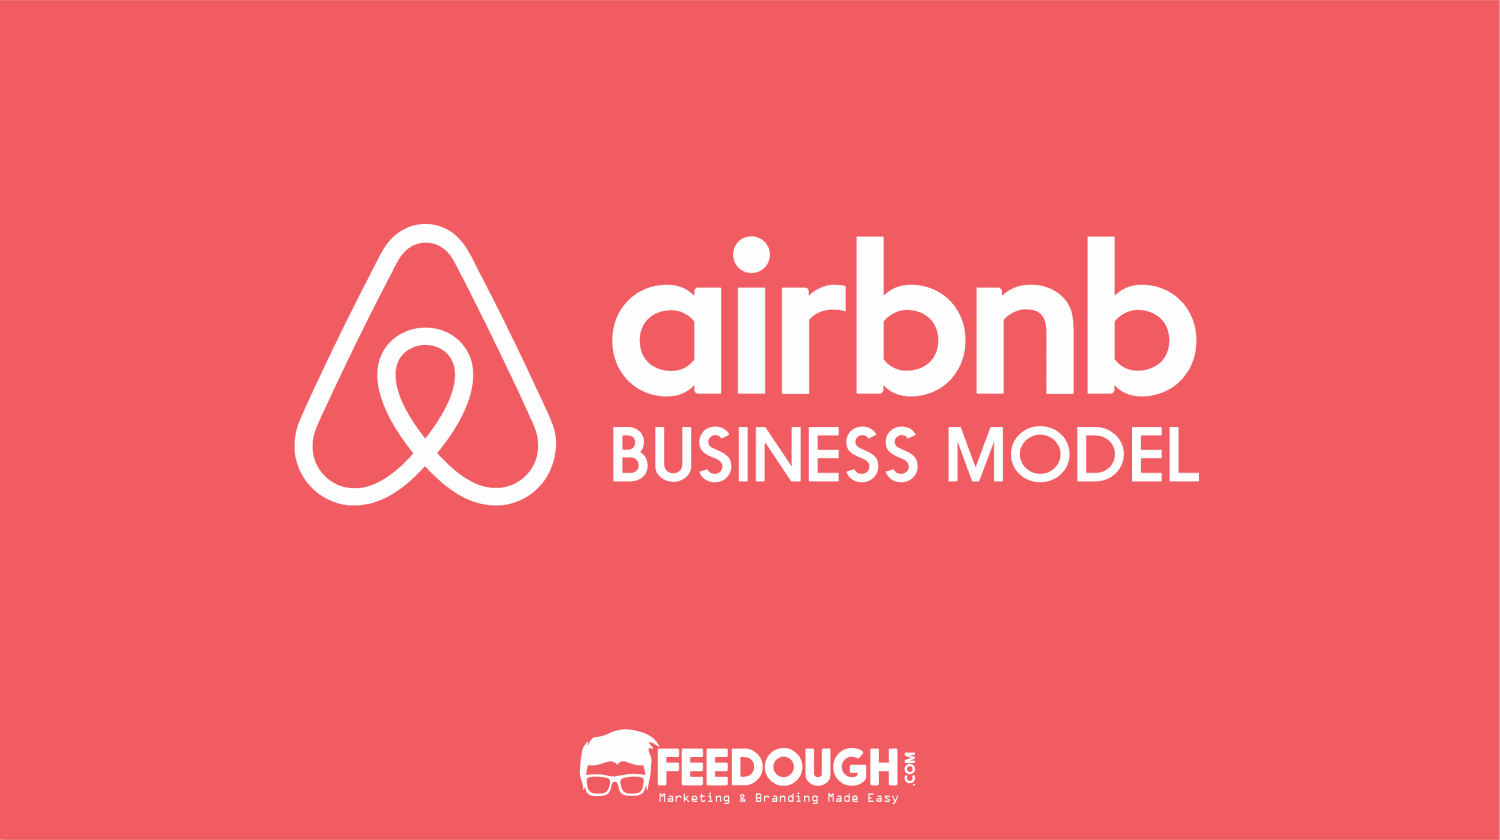 Airbnb Business Model | How Does Airbnb Make Money?